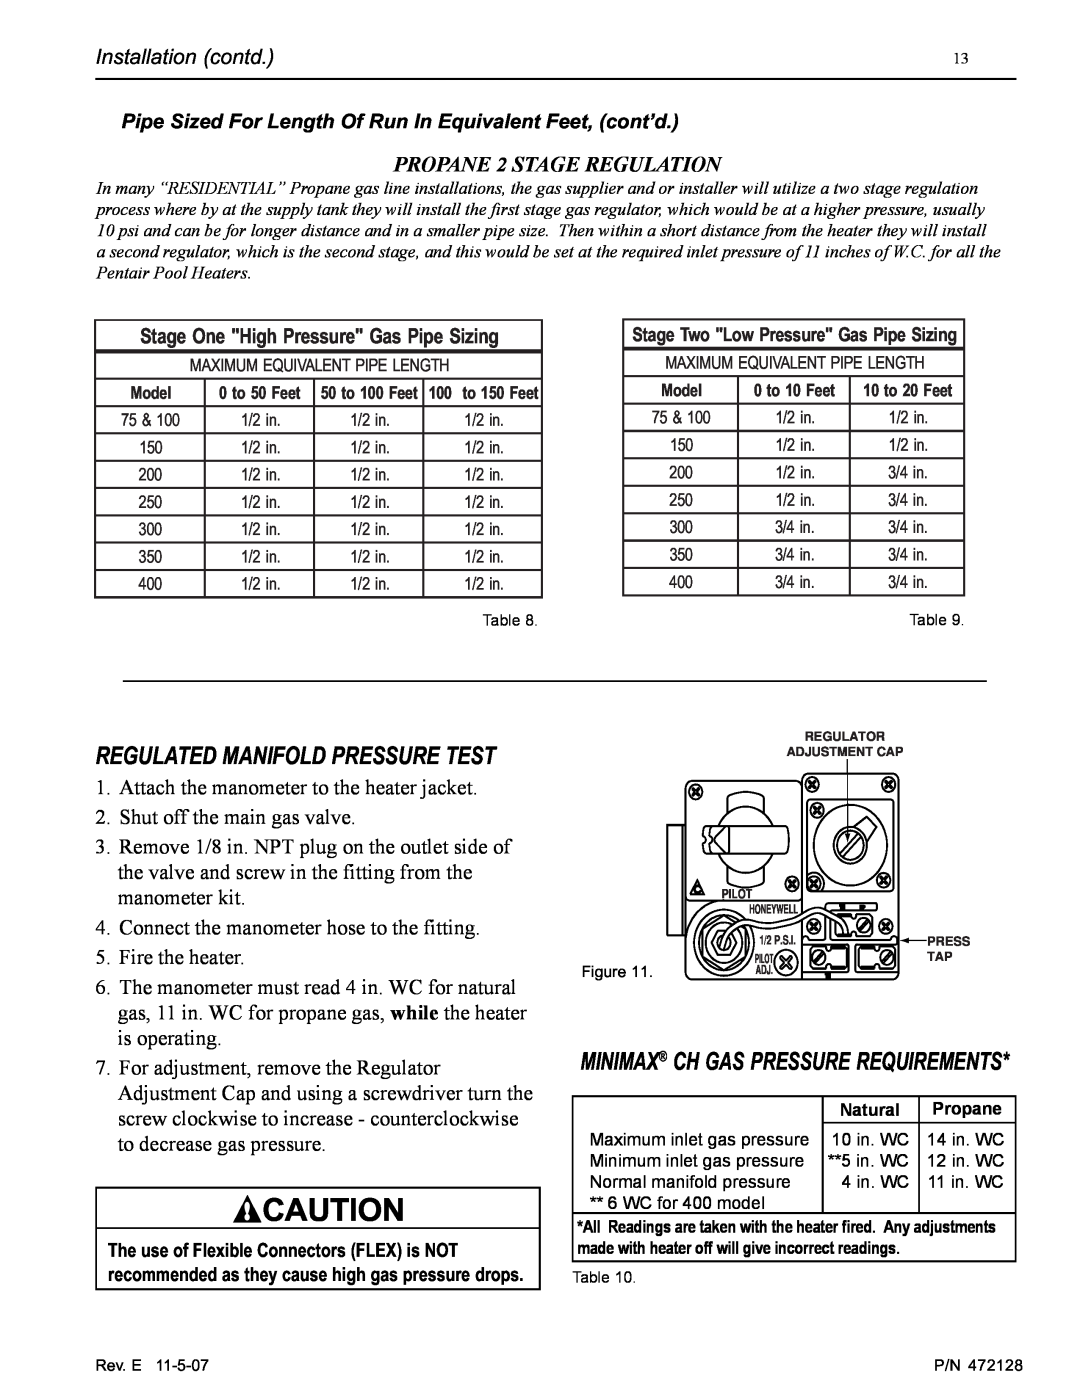 Pentair Hot Tub manual Regulated Manifold Pressure Test, Minimax Ch Gas Pressure Requirements, PROPANE 2 STAGE REGULATION 